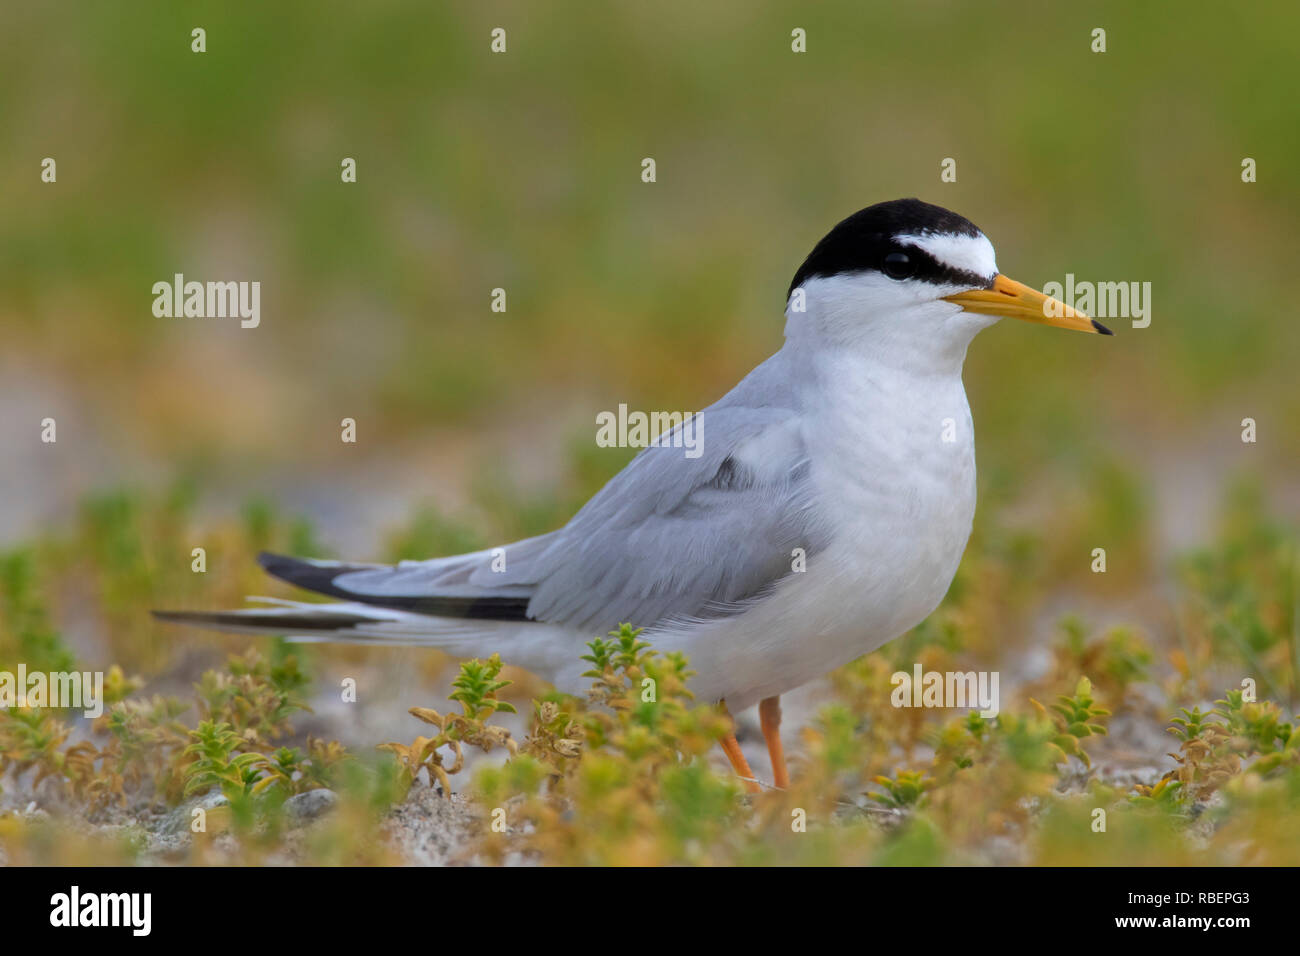 Little tern (Sternula albifrons / Sterna albifrons) on the beach in late spring / summer Stock Photo